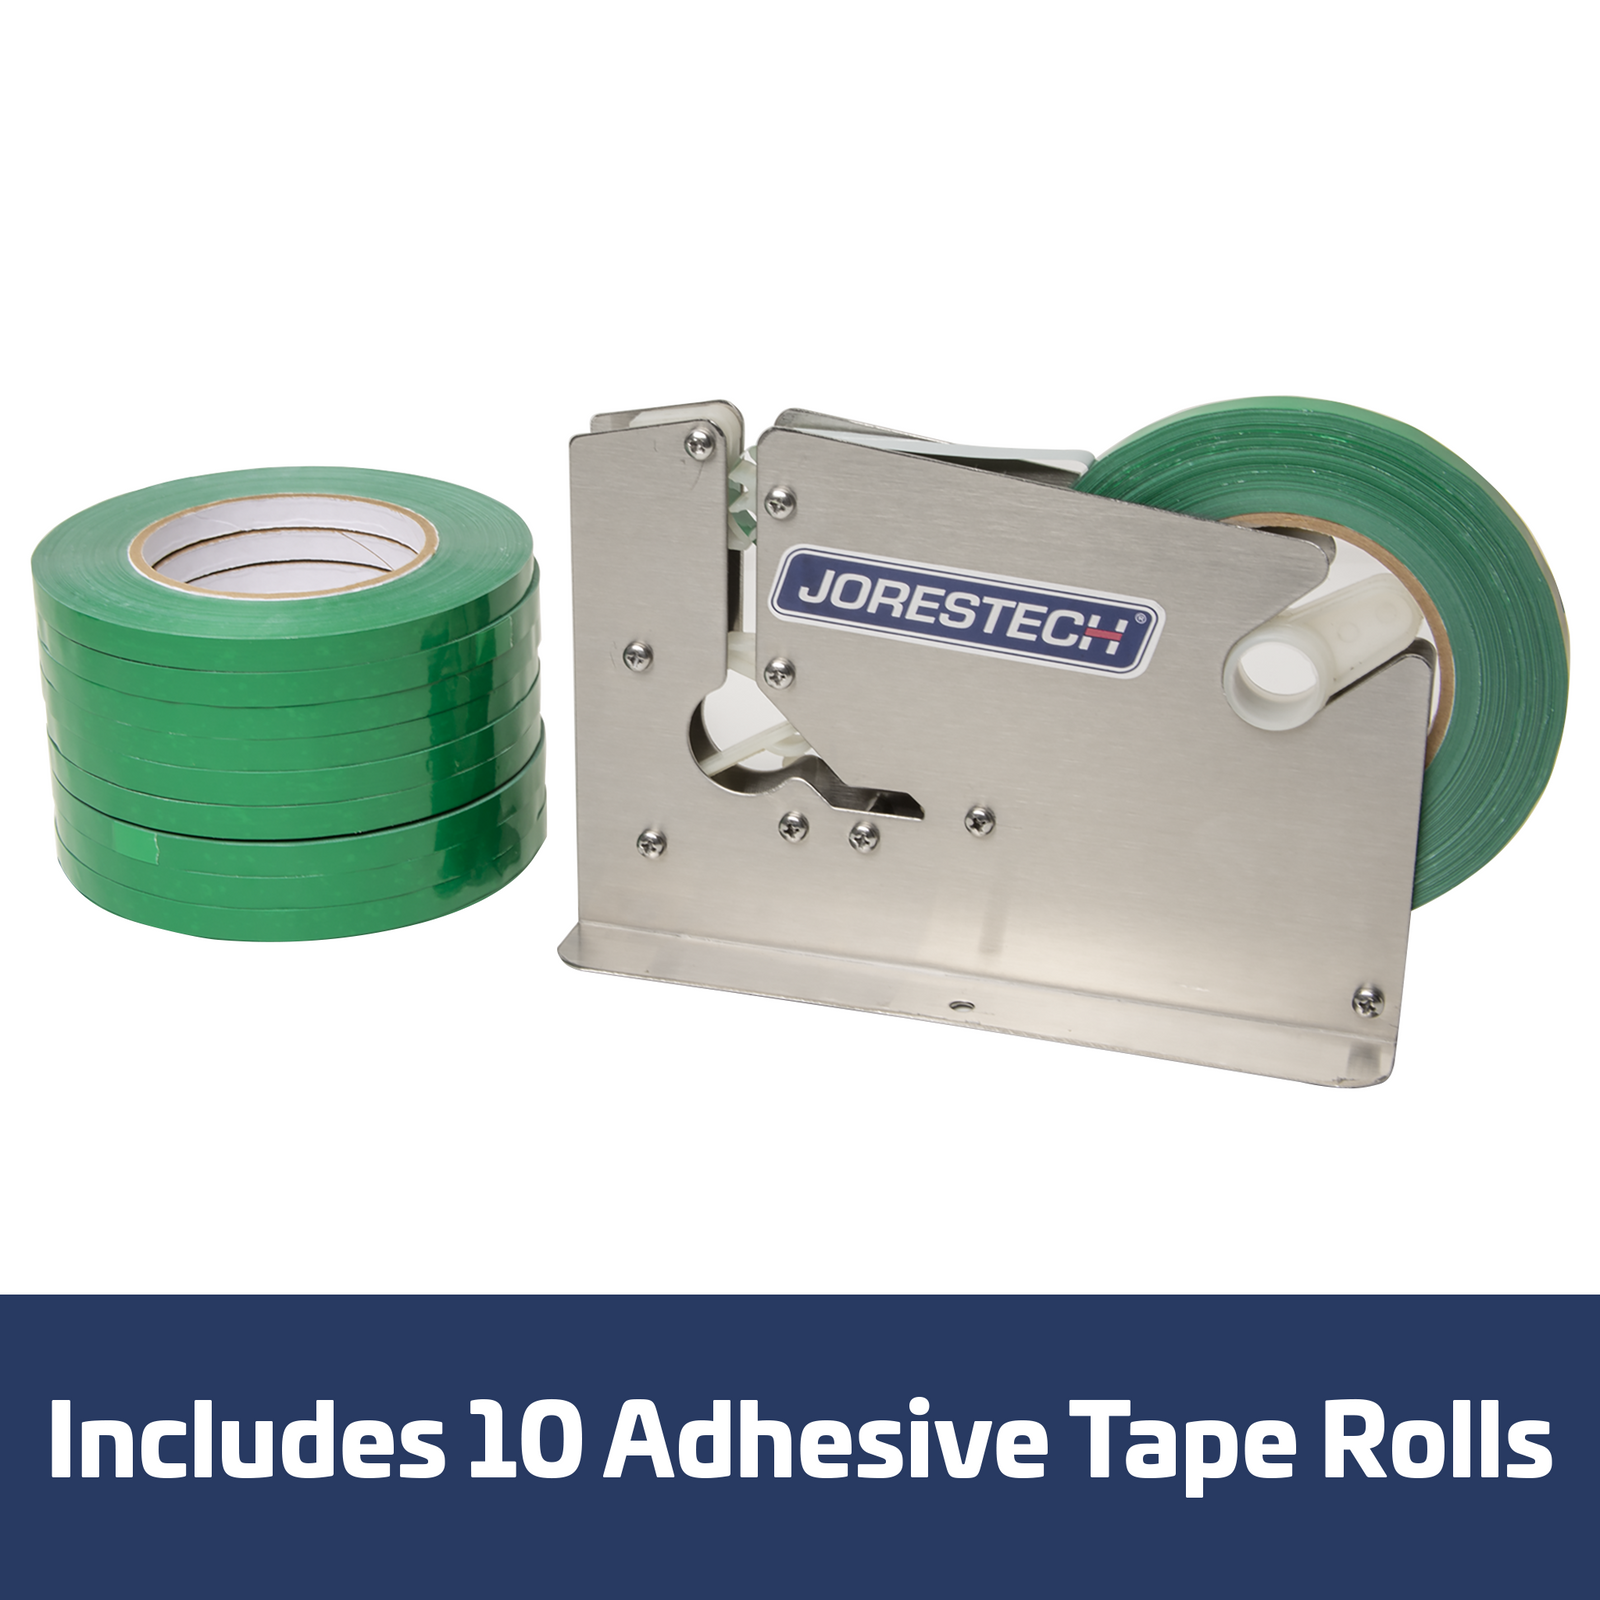 Machine to Tape Top of Bag in Stainless Steel by JORES